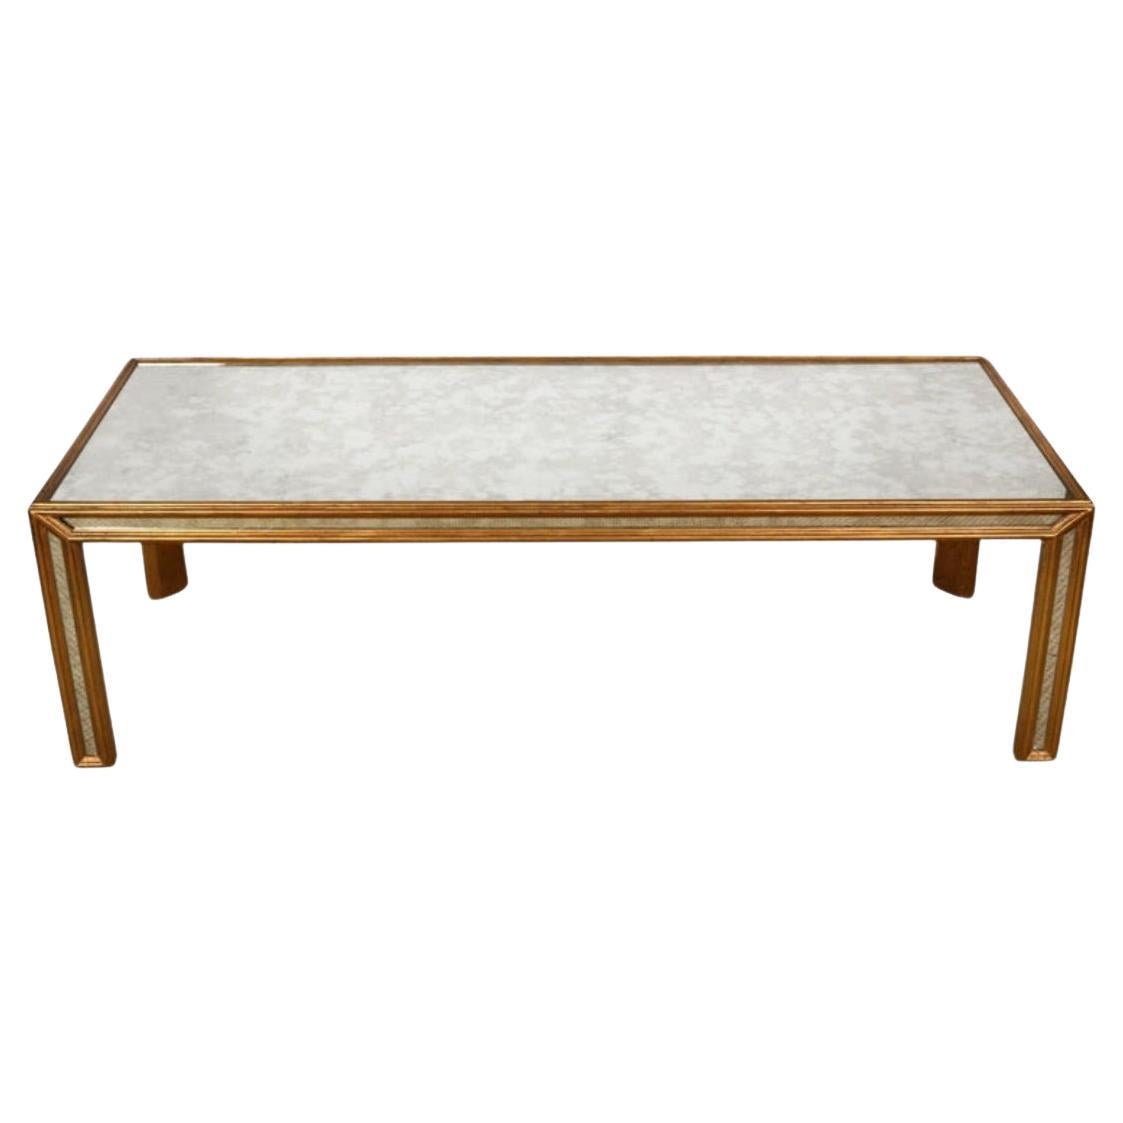 Elegant Gilt and Mirrored Glass Coffee Table by Bernhardt